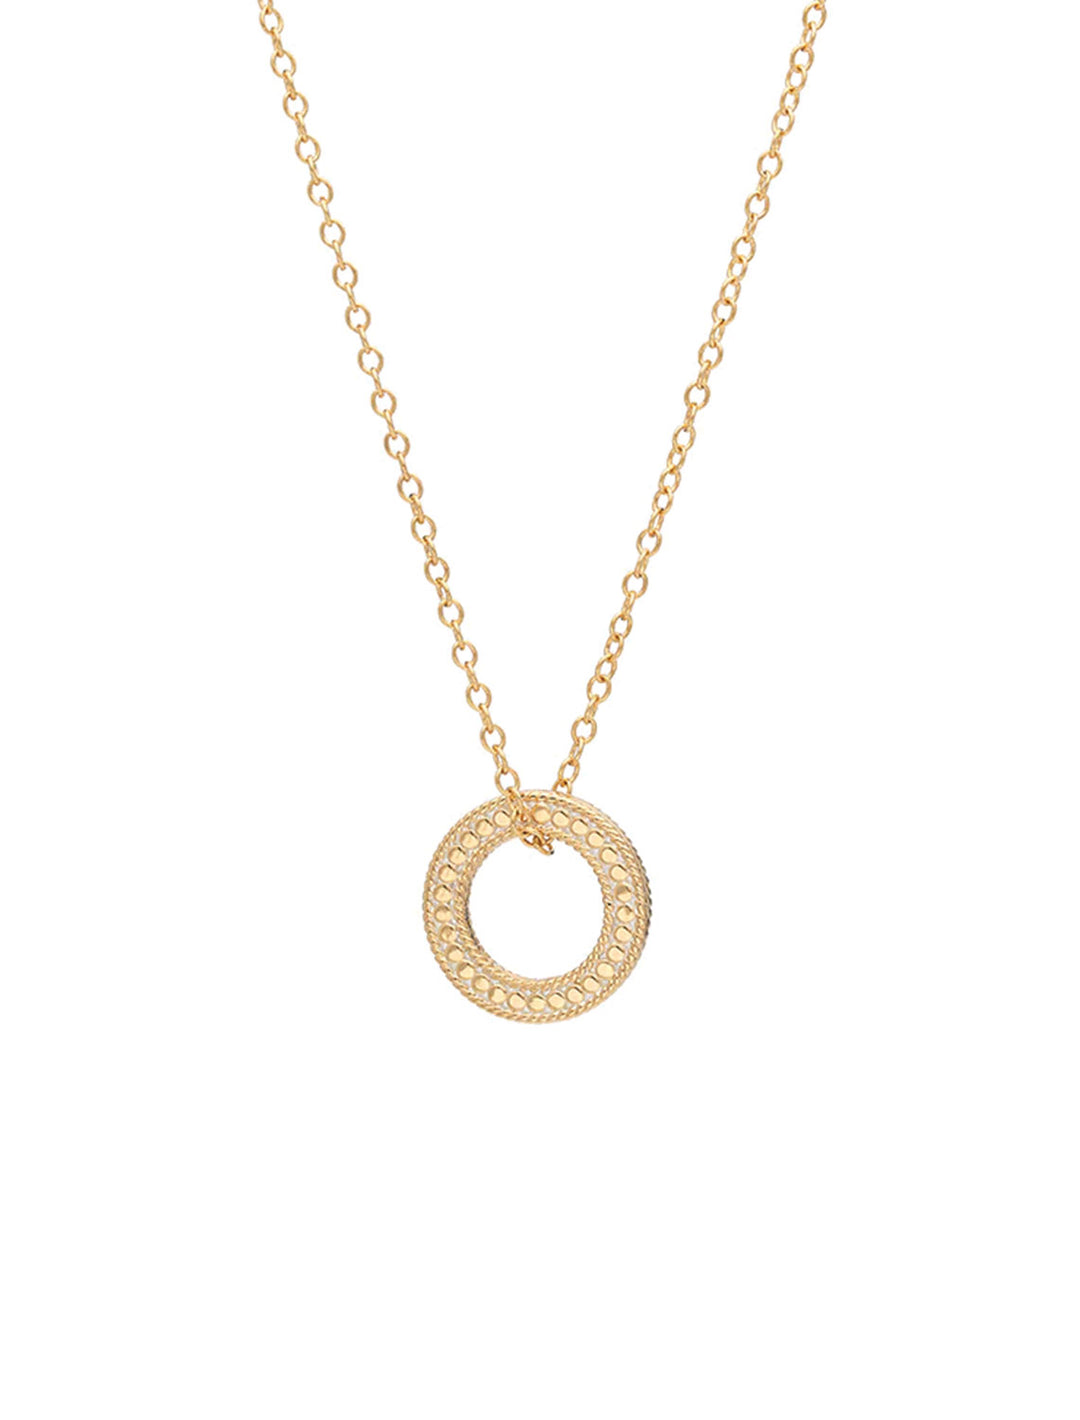 Front view of Anna Beck's circle of life necklace in gold.